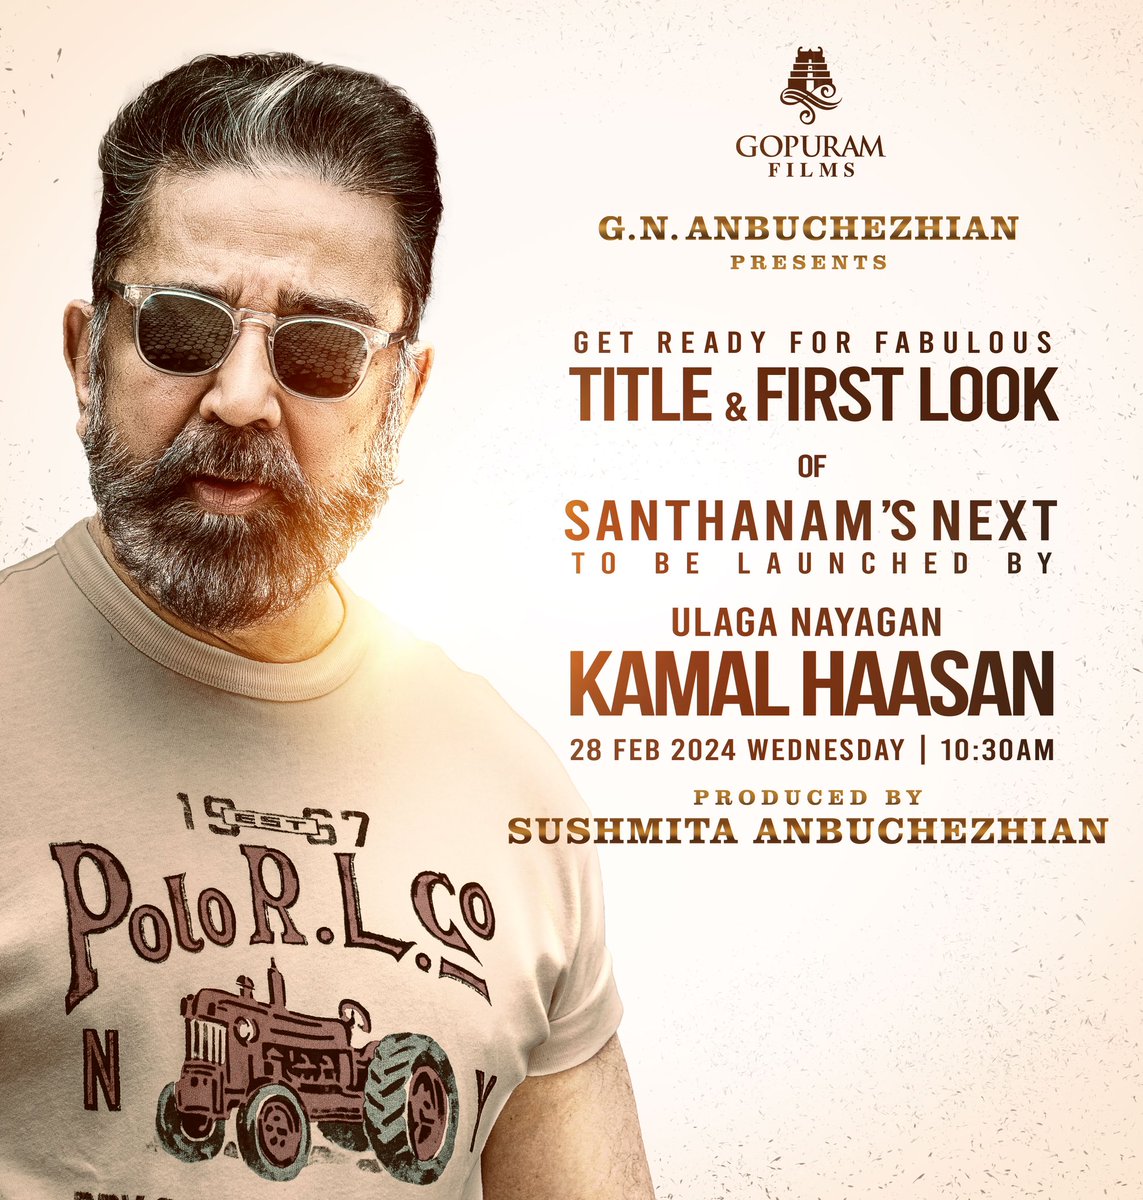 Excitement at its PEAK💥
The Title & First Look of my next will be released by the connoisseur of Indian Cinema🤩 #Ulaganayagan @ikamalhaasan sir 😇 Tomorrow(28th Feb) at 10:30 AM🔥

Presented by the One & Only @gopuramfilms #GNAnbuchezhian sir, Produced by #SushmitaAnbuchezhian…